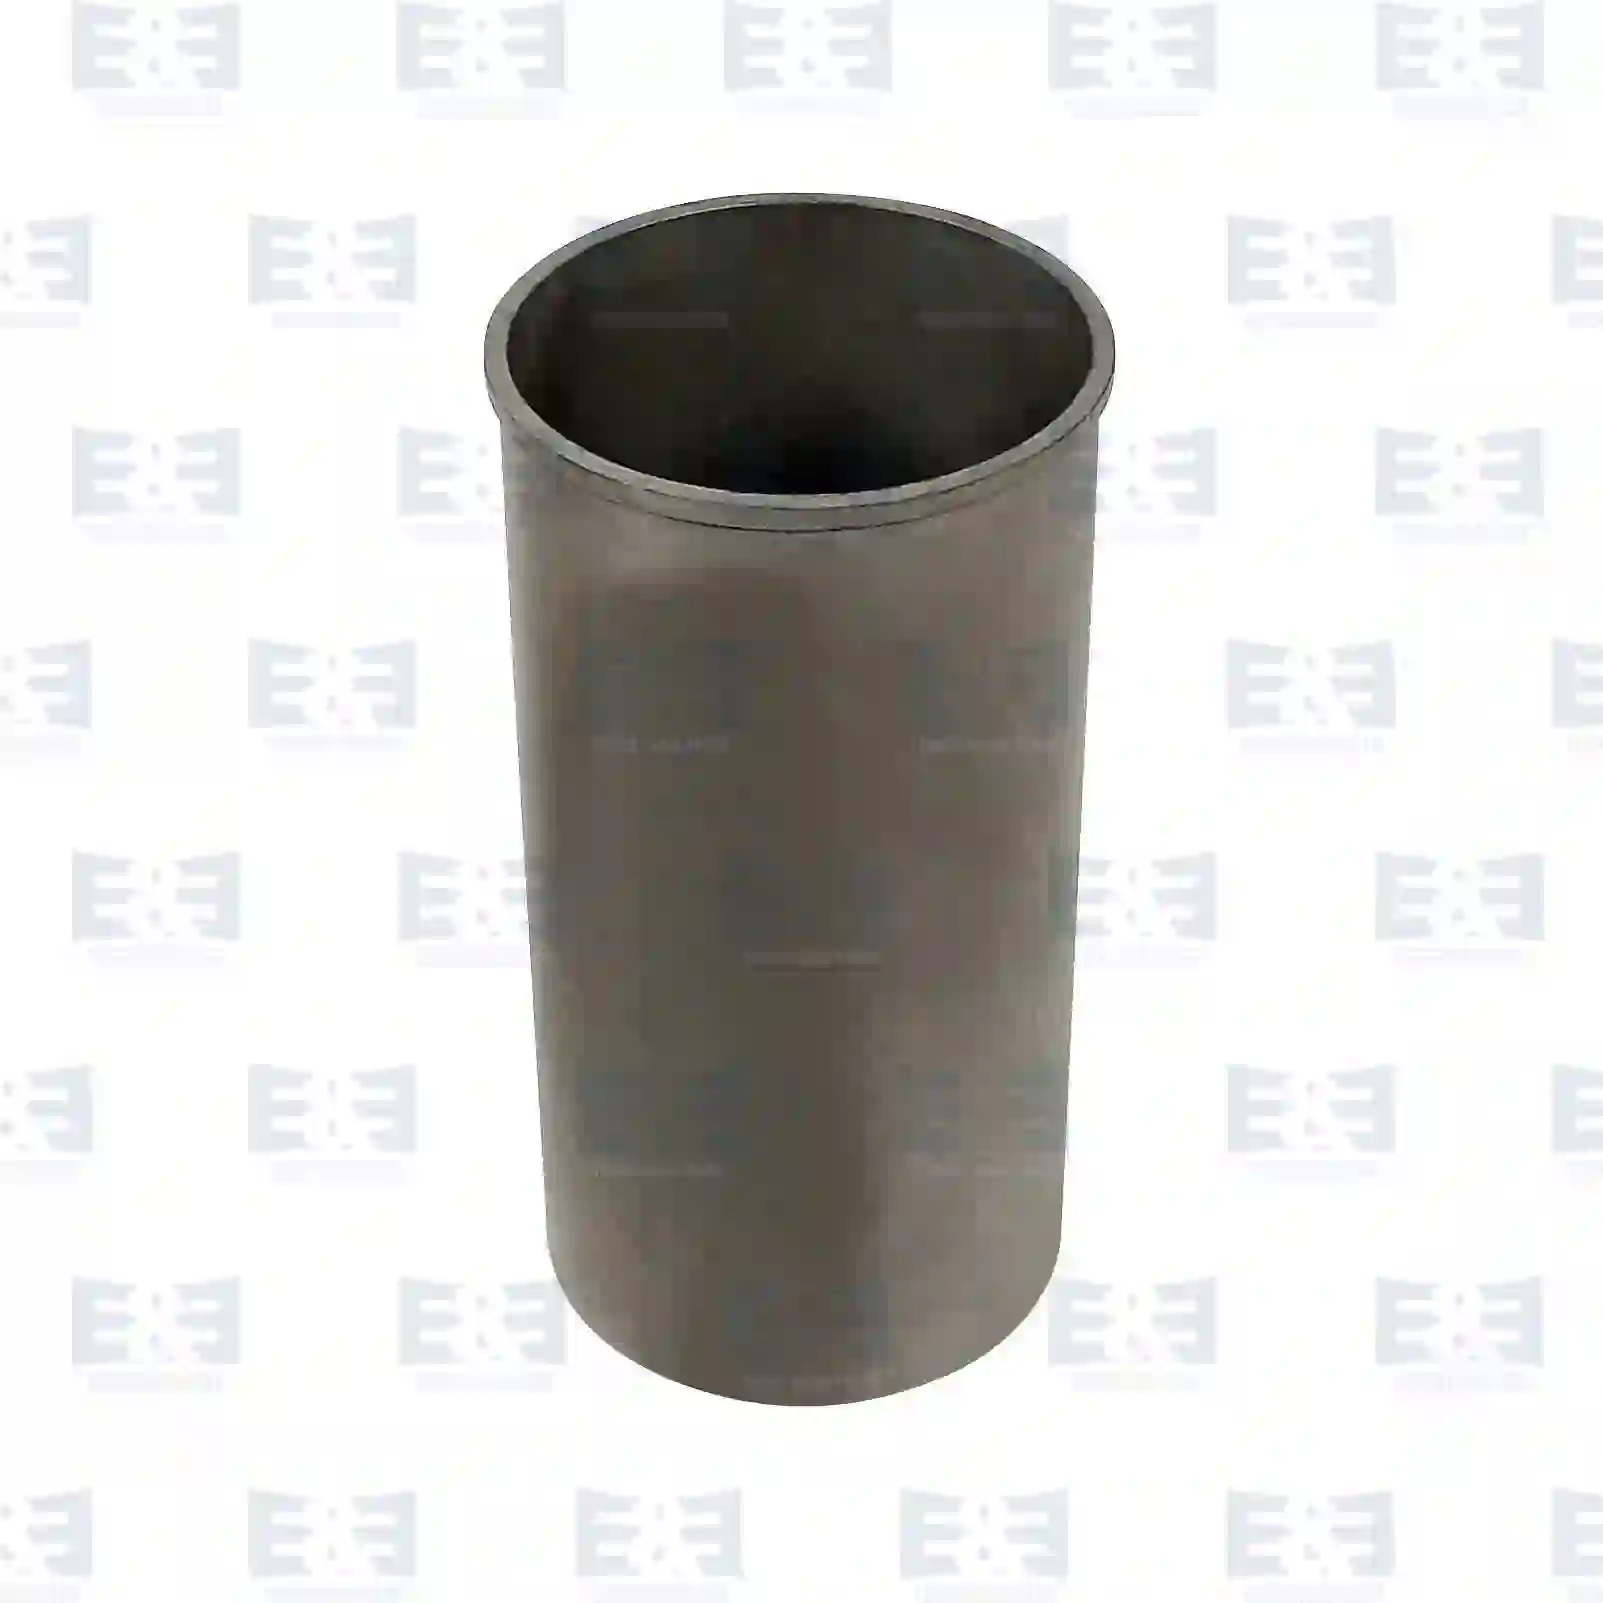 Cylinder liner, without seal rings, 2E2208144, SJ351383, 04622074, 99468534, 99467115, 99469070 ||  2E2208144 E&E Truck Spare Parts | Truck Spare Parts, Auotomotive Spare Parts Cylinder liner, without seal rings, 2E2208144, SJ351383, 04622074, 99468534, 99467115, 99469070 ||  2E2208144 E&E Truck Spare Parts | Truck Spare Parts, Auotomotive Spare Parts